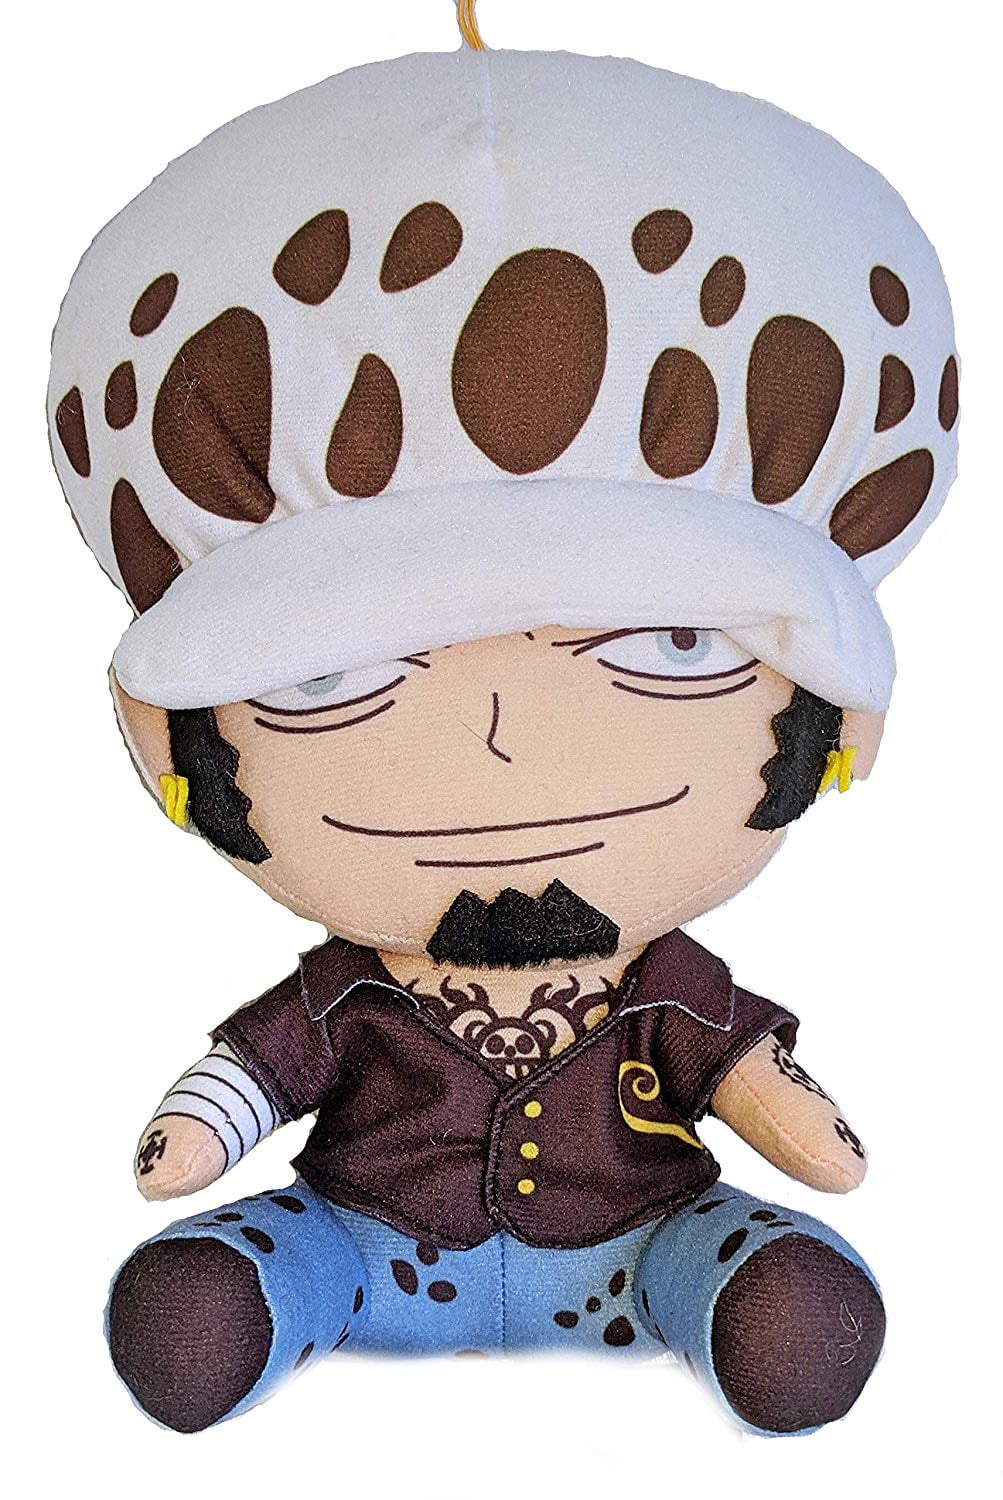 One Piece, Trafalgar Law - Zou Arc Outfit, 6 Sitting Plush - Our Store, Anime, Dungeons & Dragons, Disney